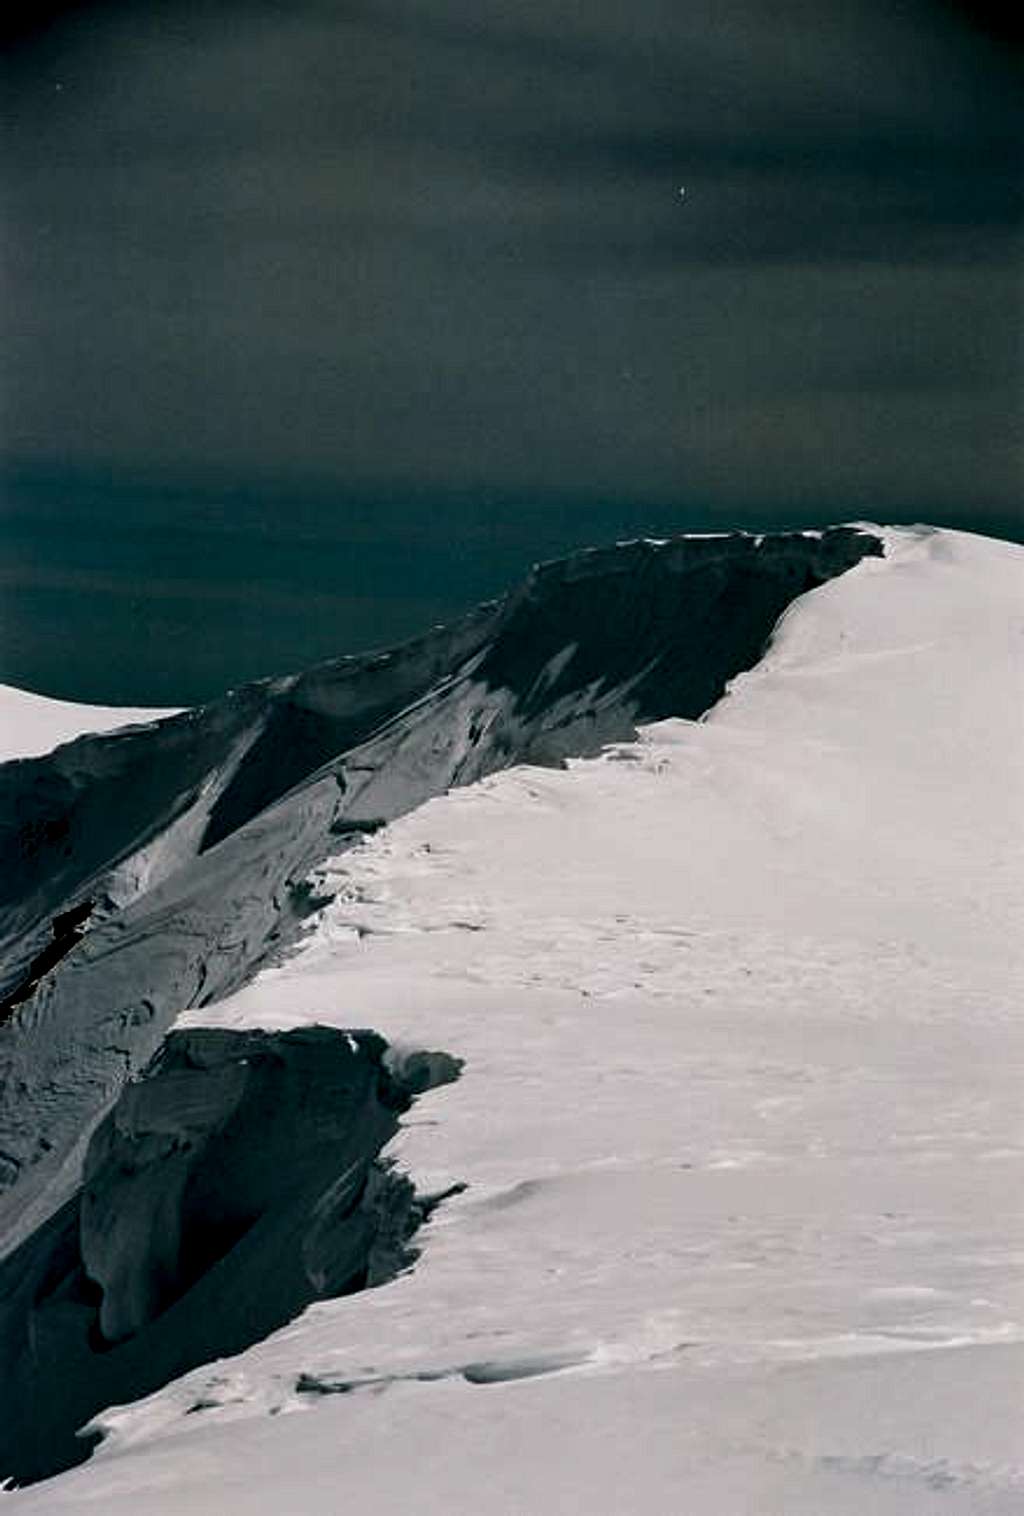 Cornices to the east of the...